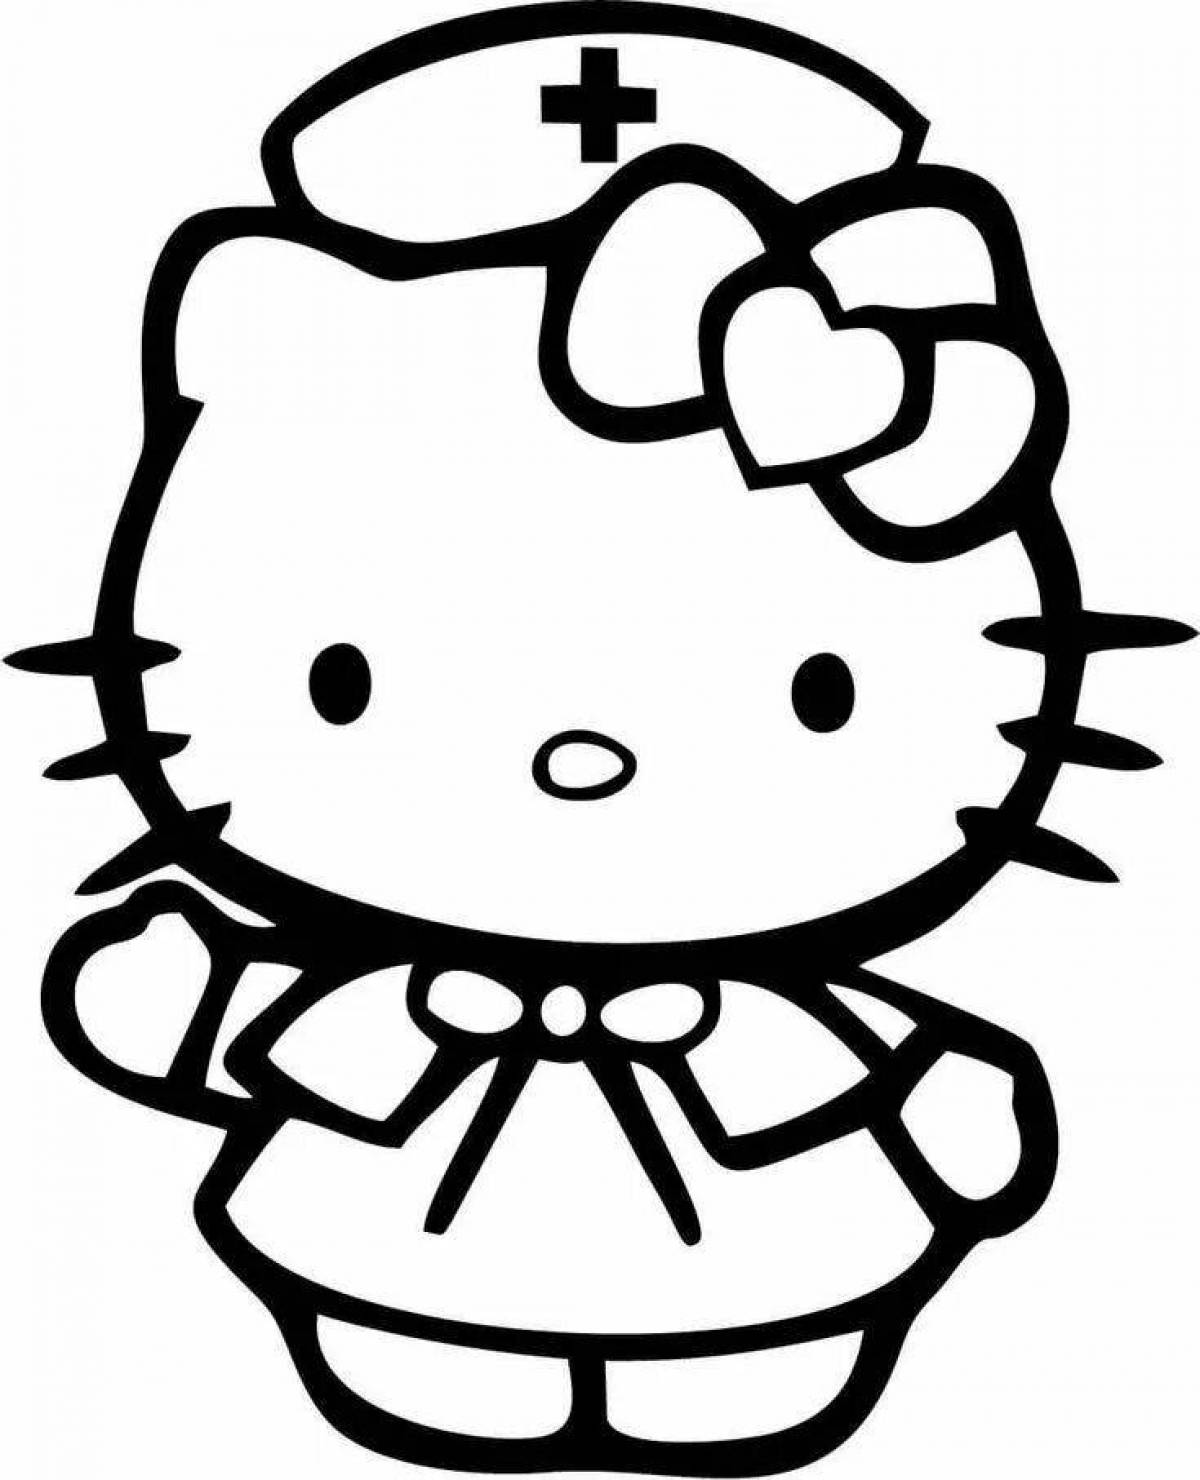 Playful hello kitty coloring in black and white